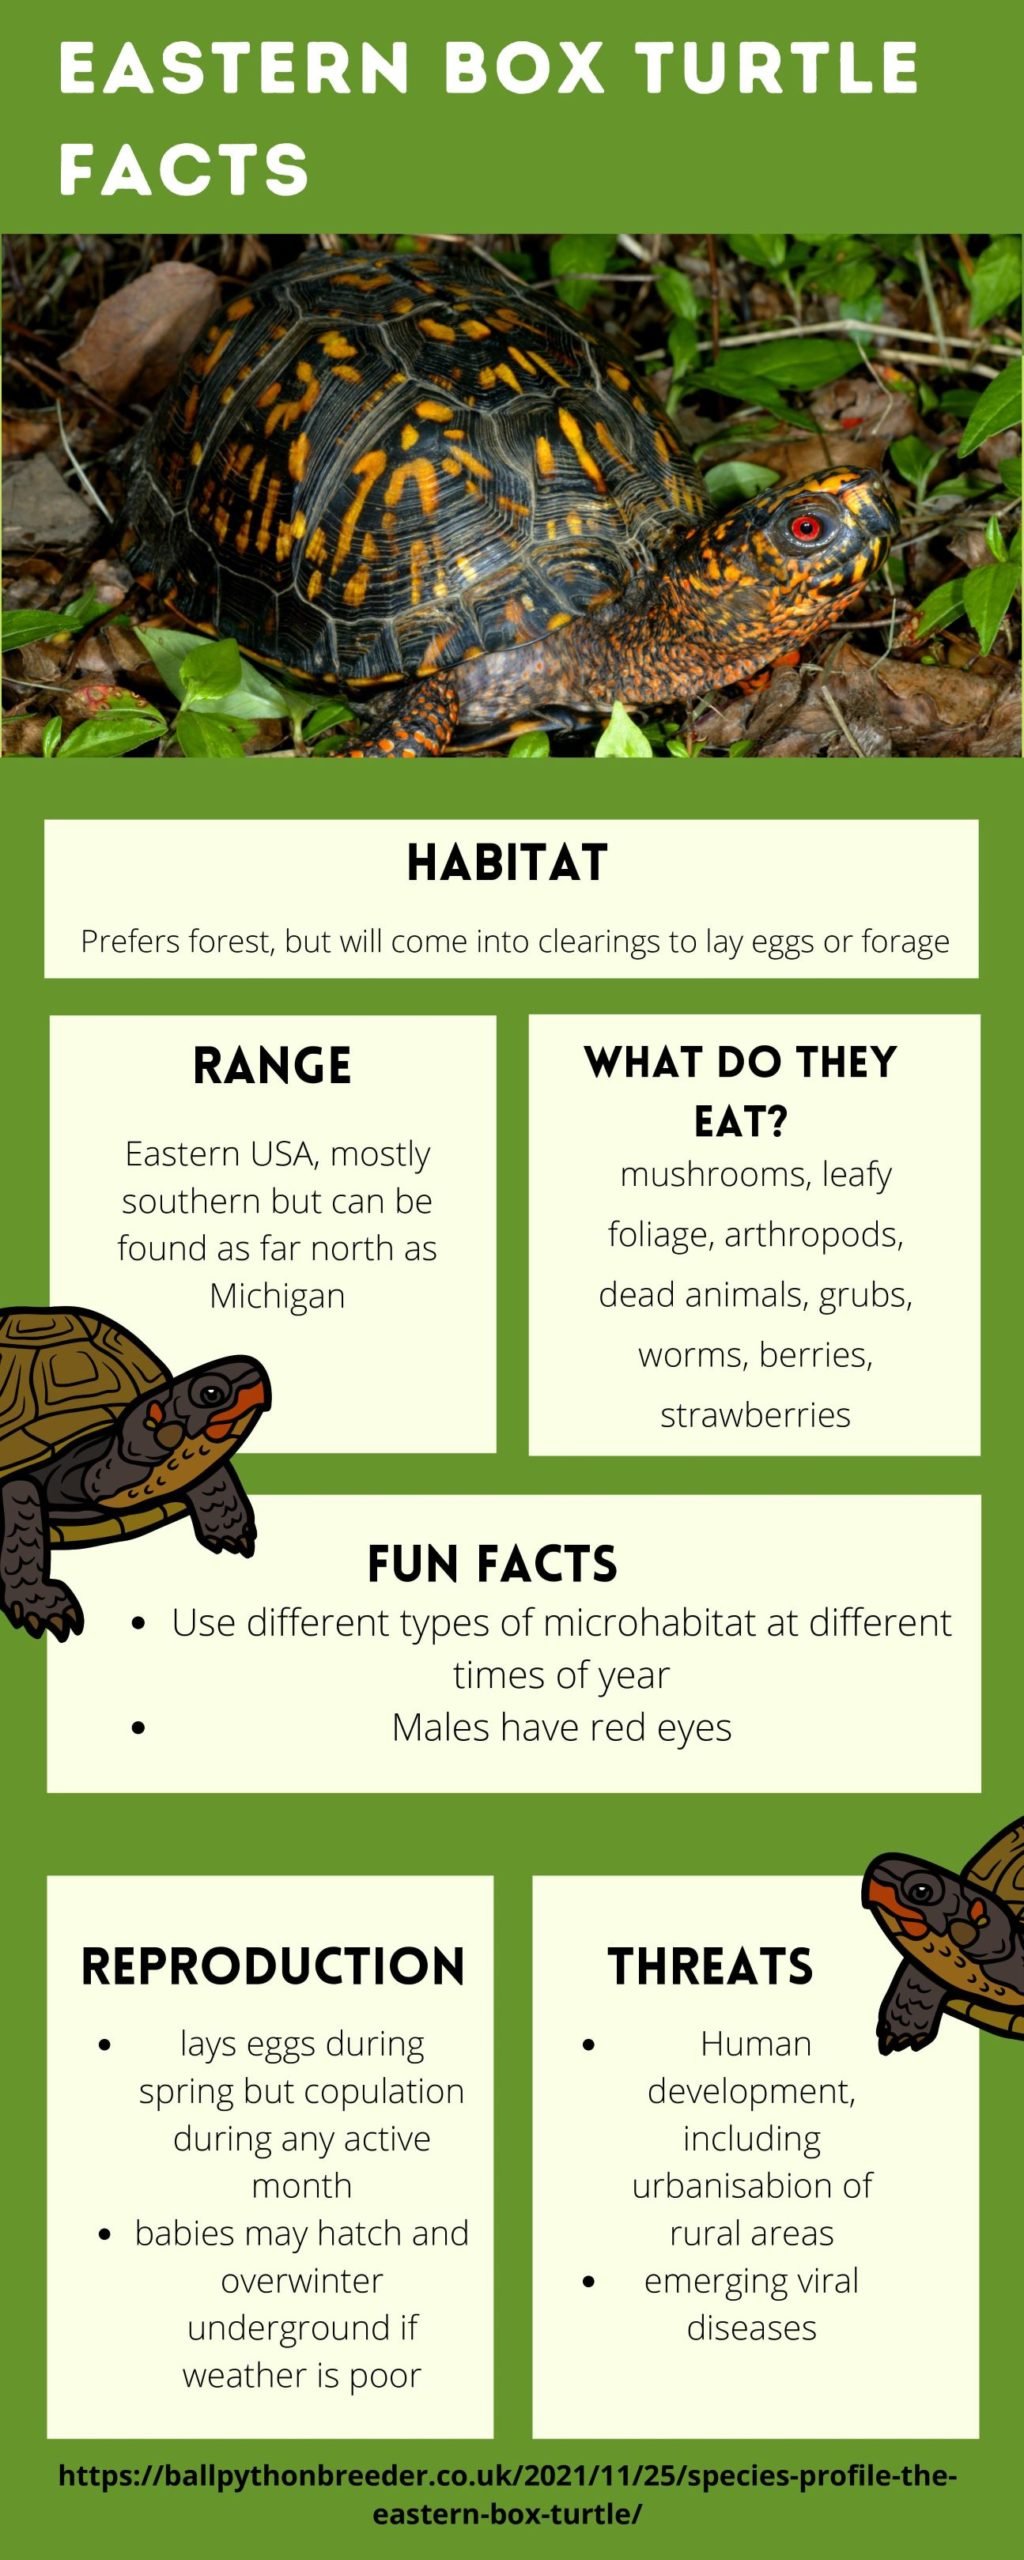 Eastern Box Turtle Facts